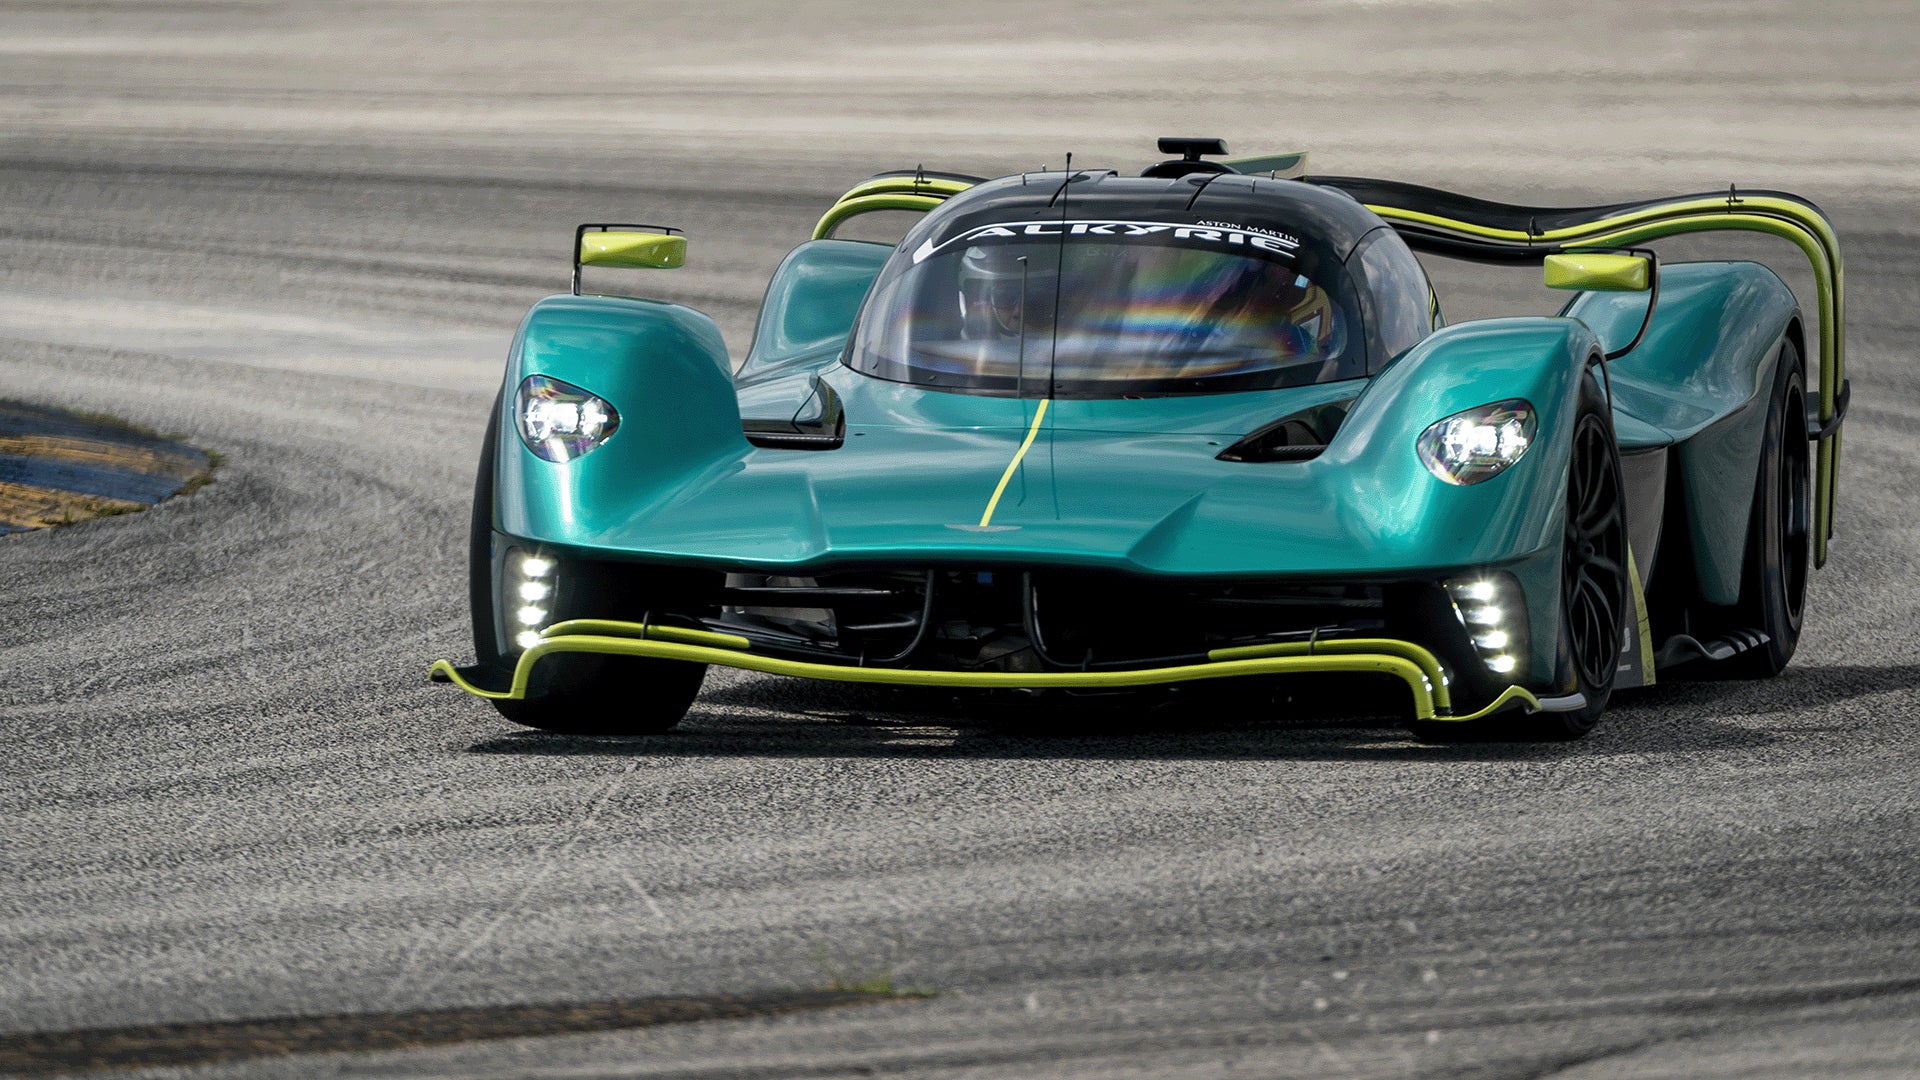 Ridealong: the Aston Martin Valkyrie AMR Pro Is One of the Most Savage Cars Ever Made